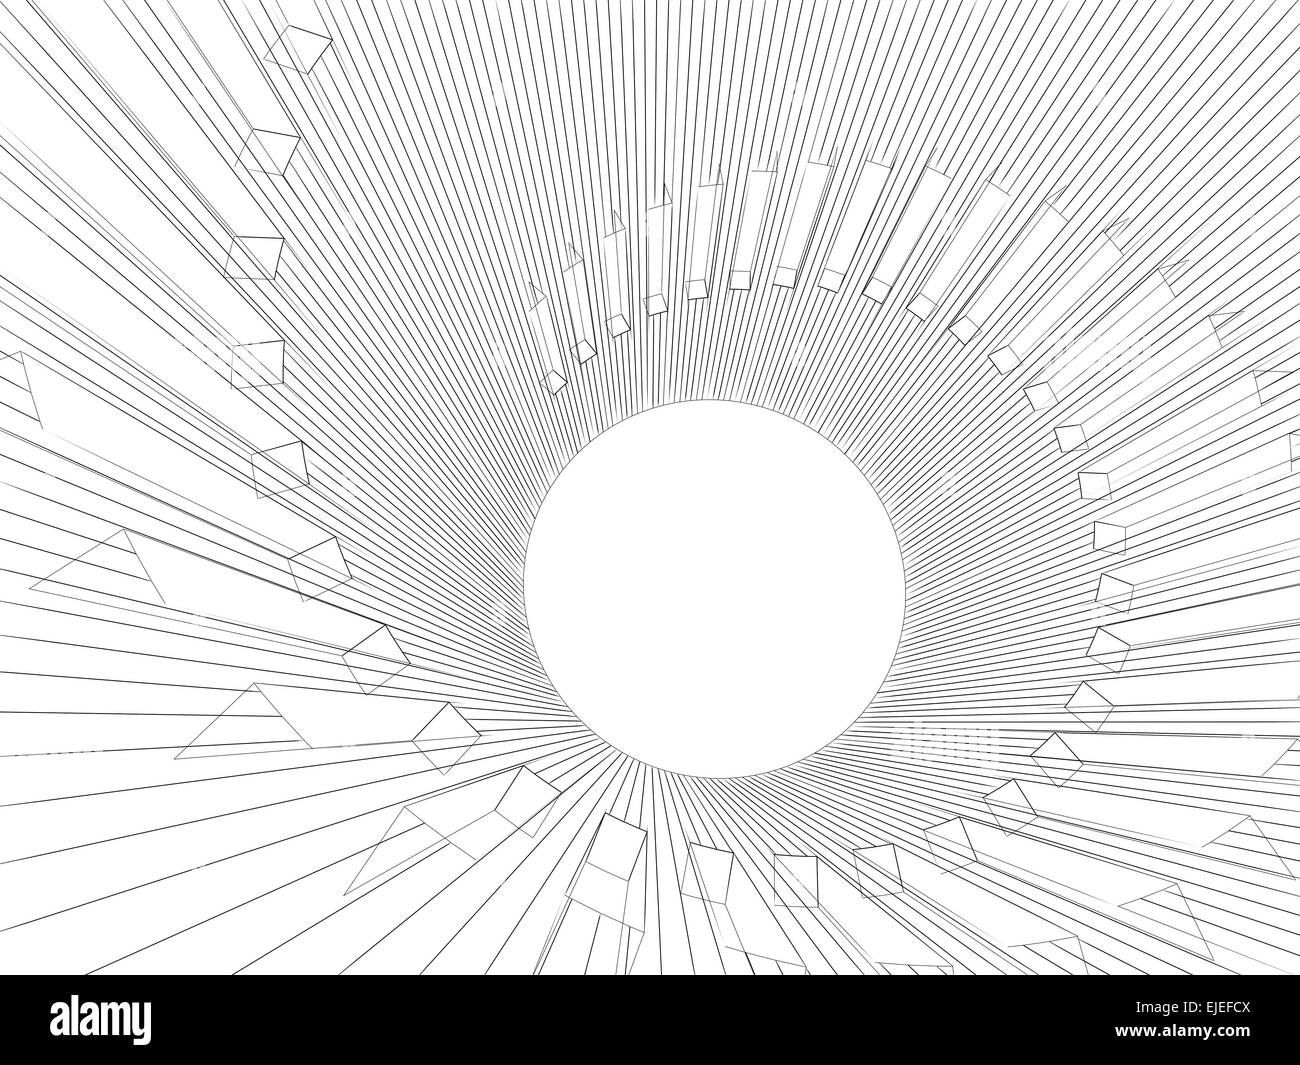 Abstract digital 3d illustration with black wire-frame spiral structure on white background Stock Photo